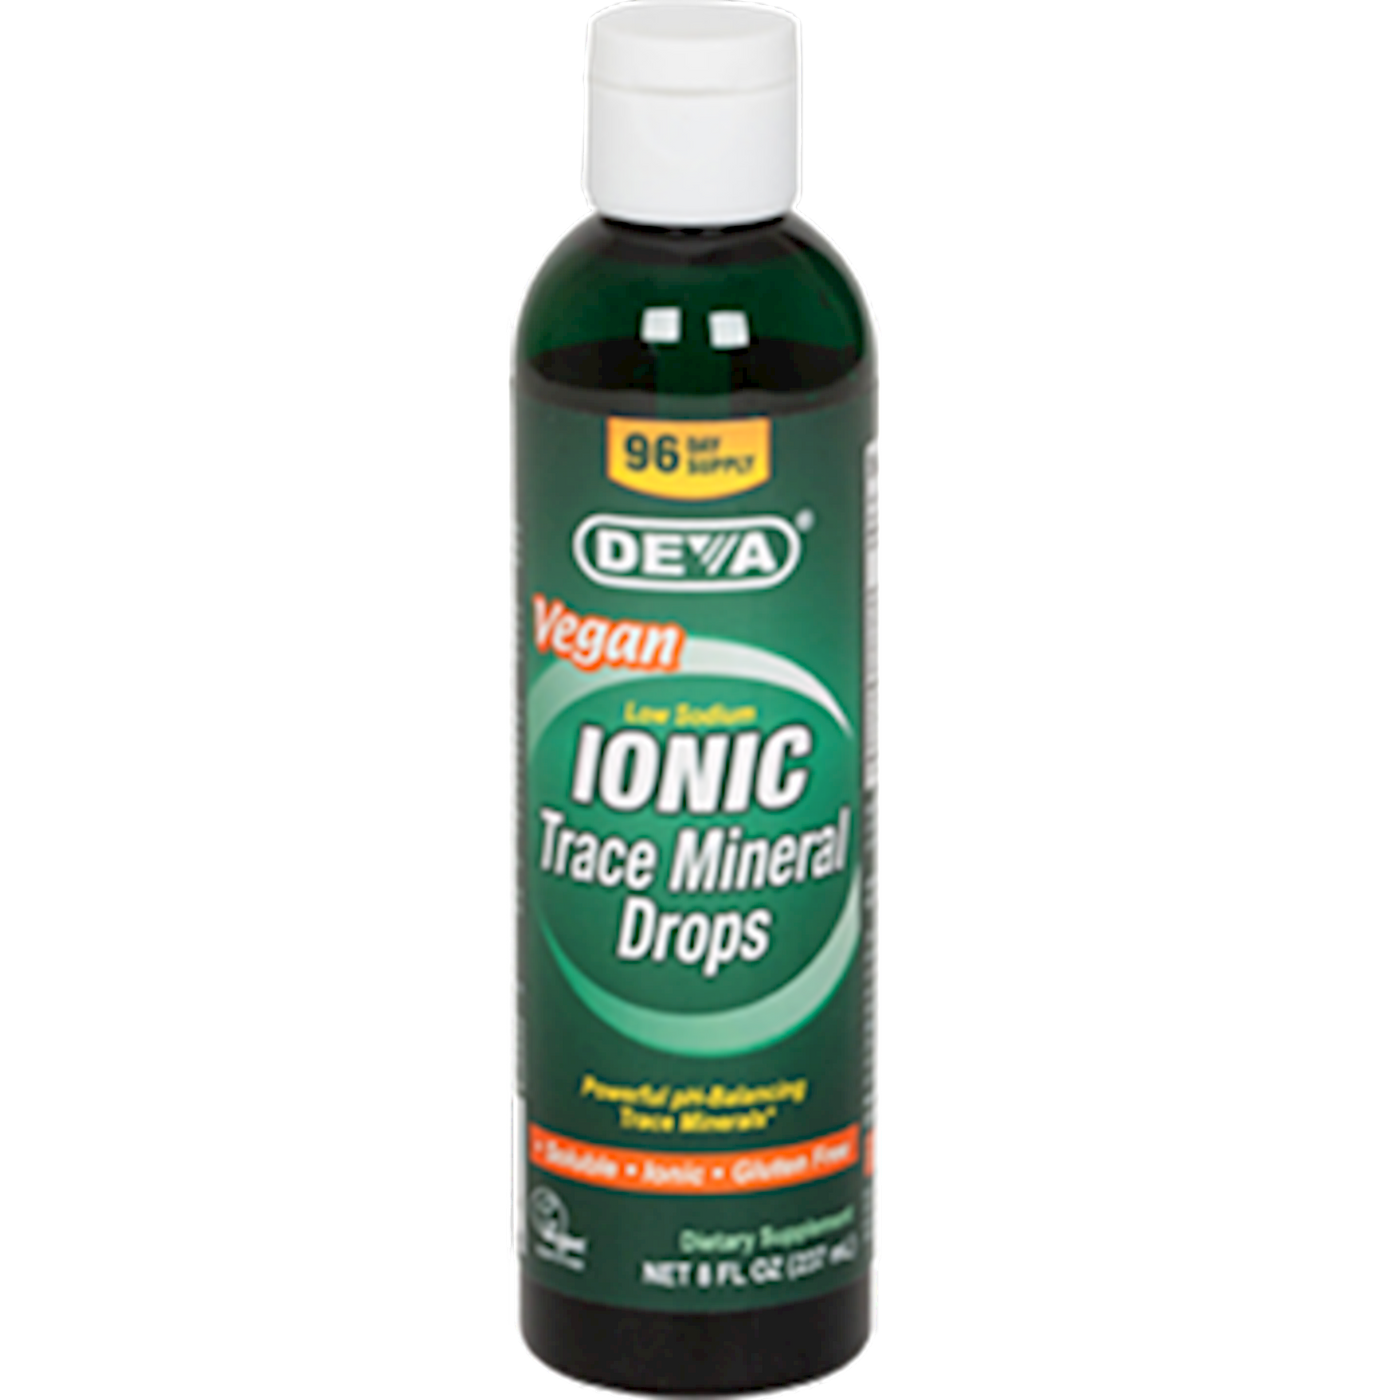 Vegan Ionic Trace Mineral Drops  Curated Wellness